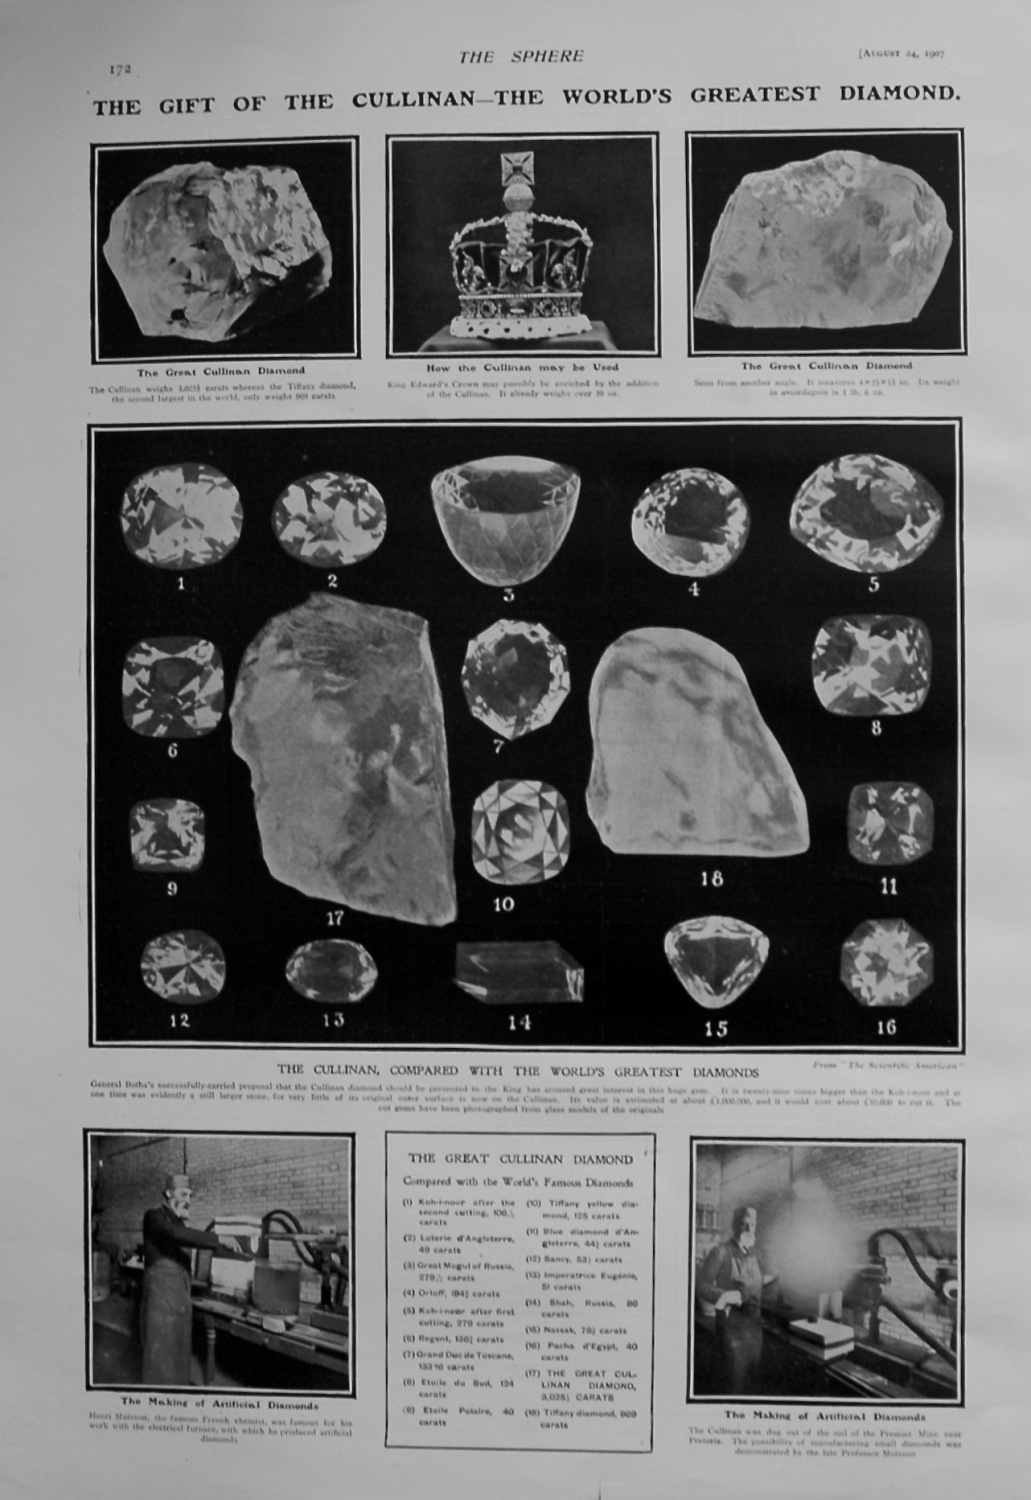 Gift of the Cullinan - The World's Greatest Diamond. 1907